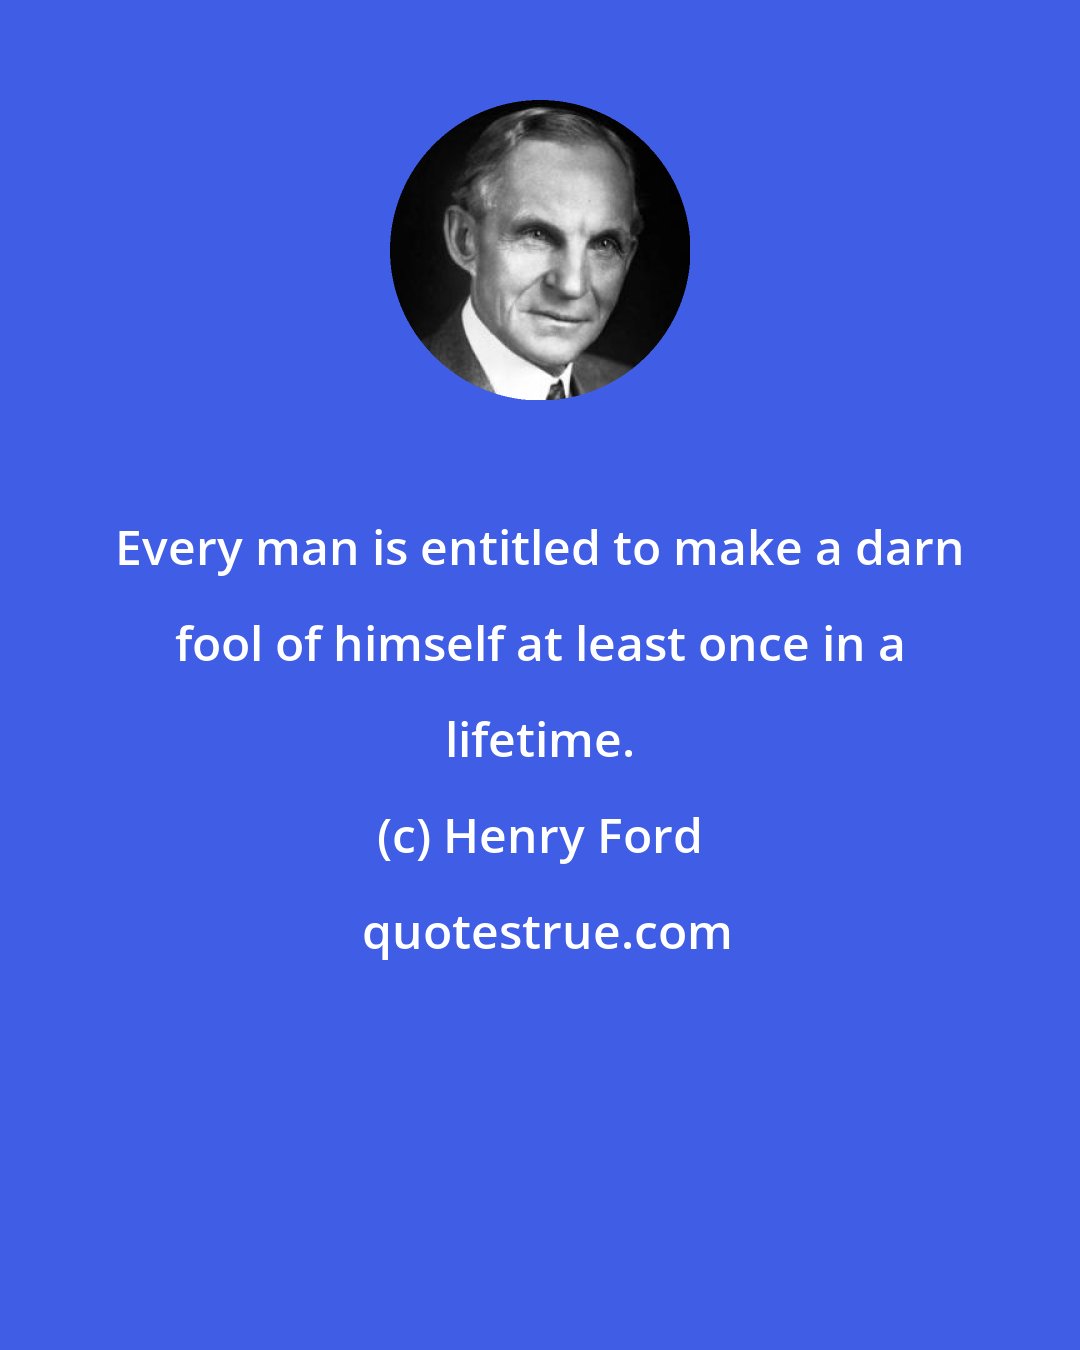 Henry Ford: Every man is entitled to make a darn fool of himself at least once in a lifetime.